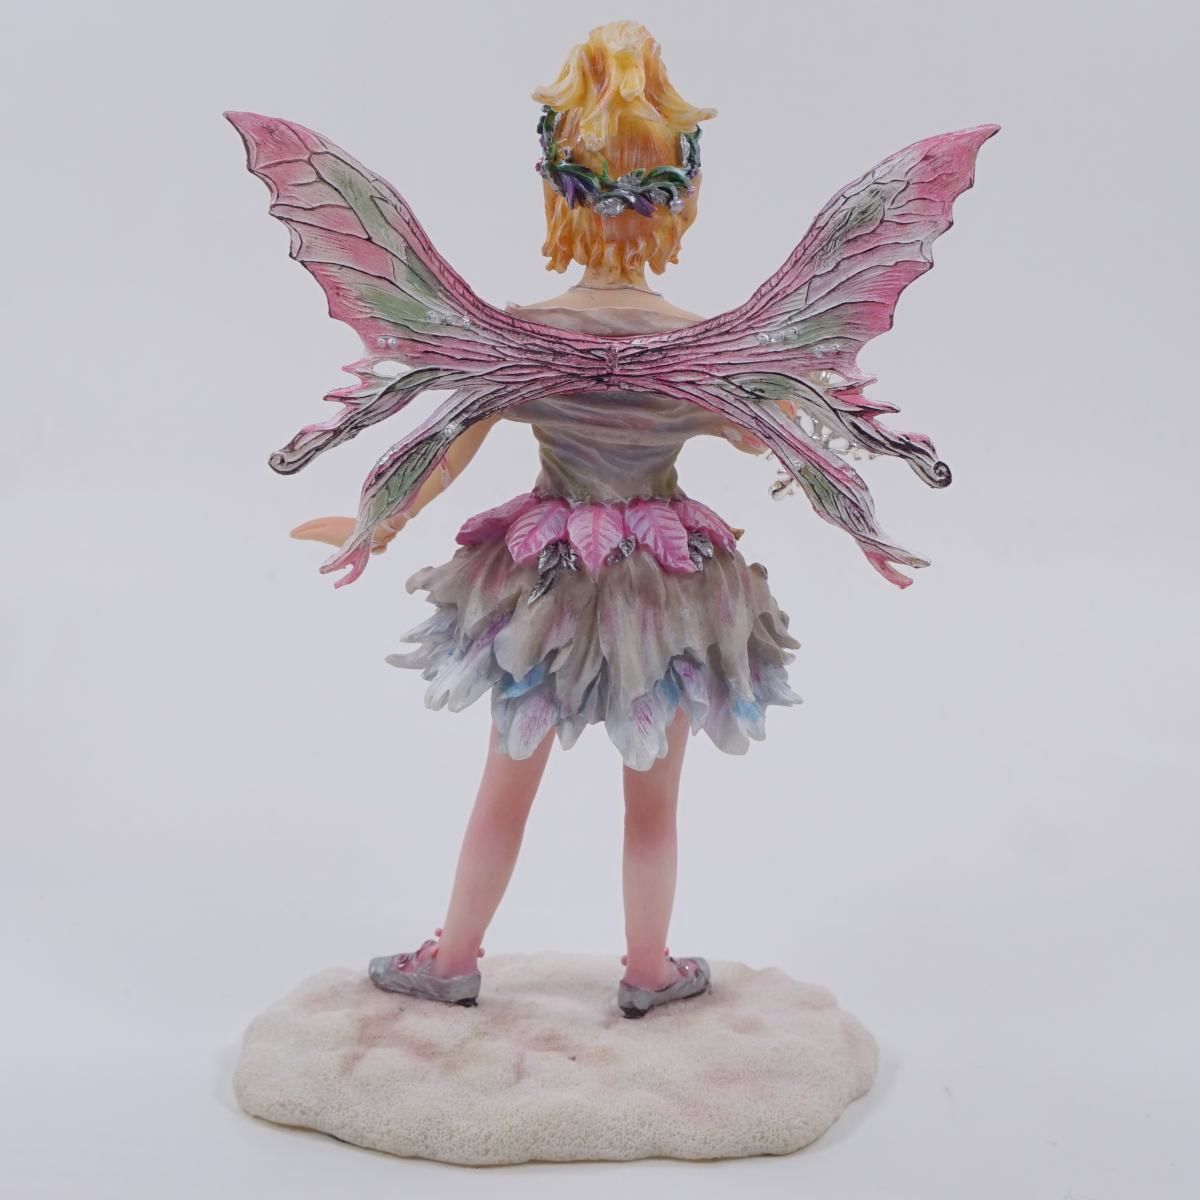 Crisalis Collection★ Silver Sparkle Faerie (1-1690) 30% OFF